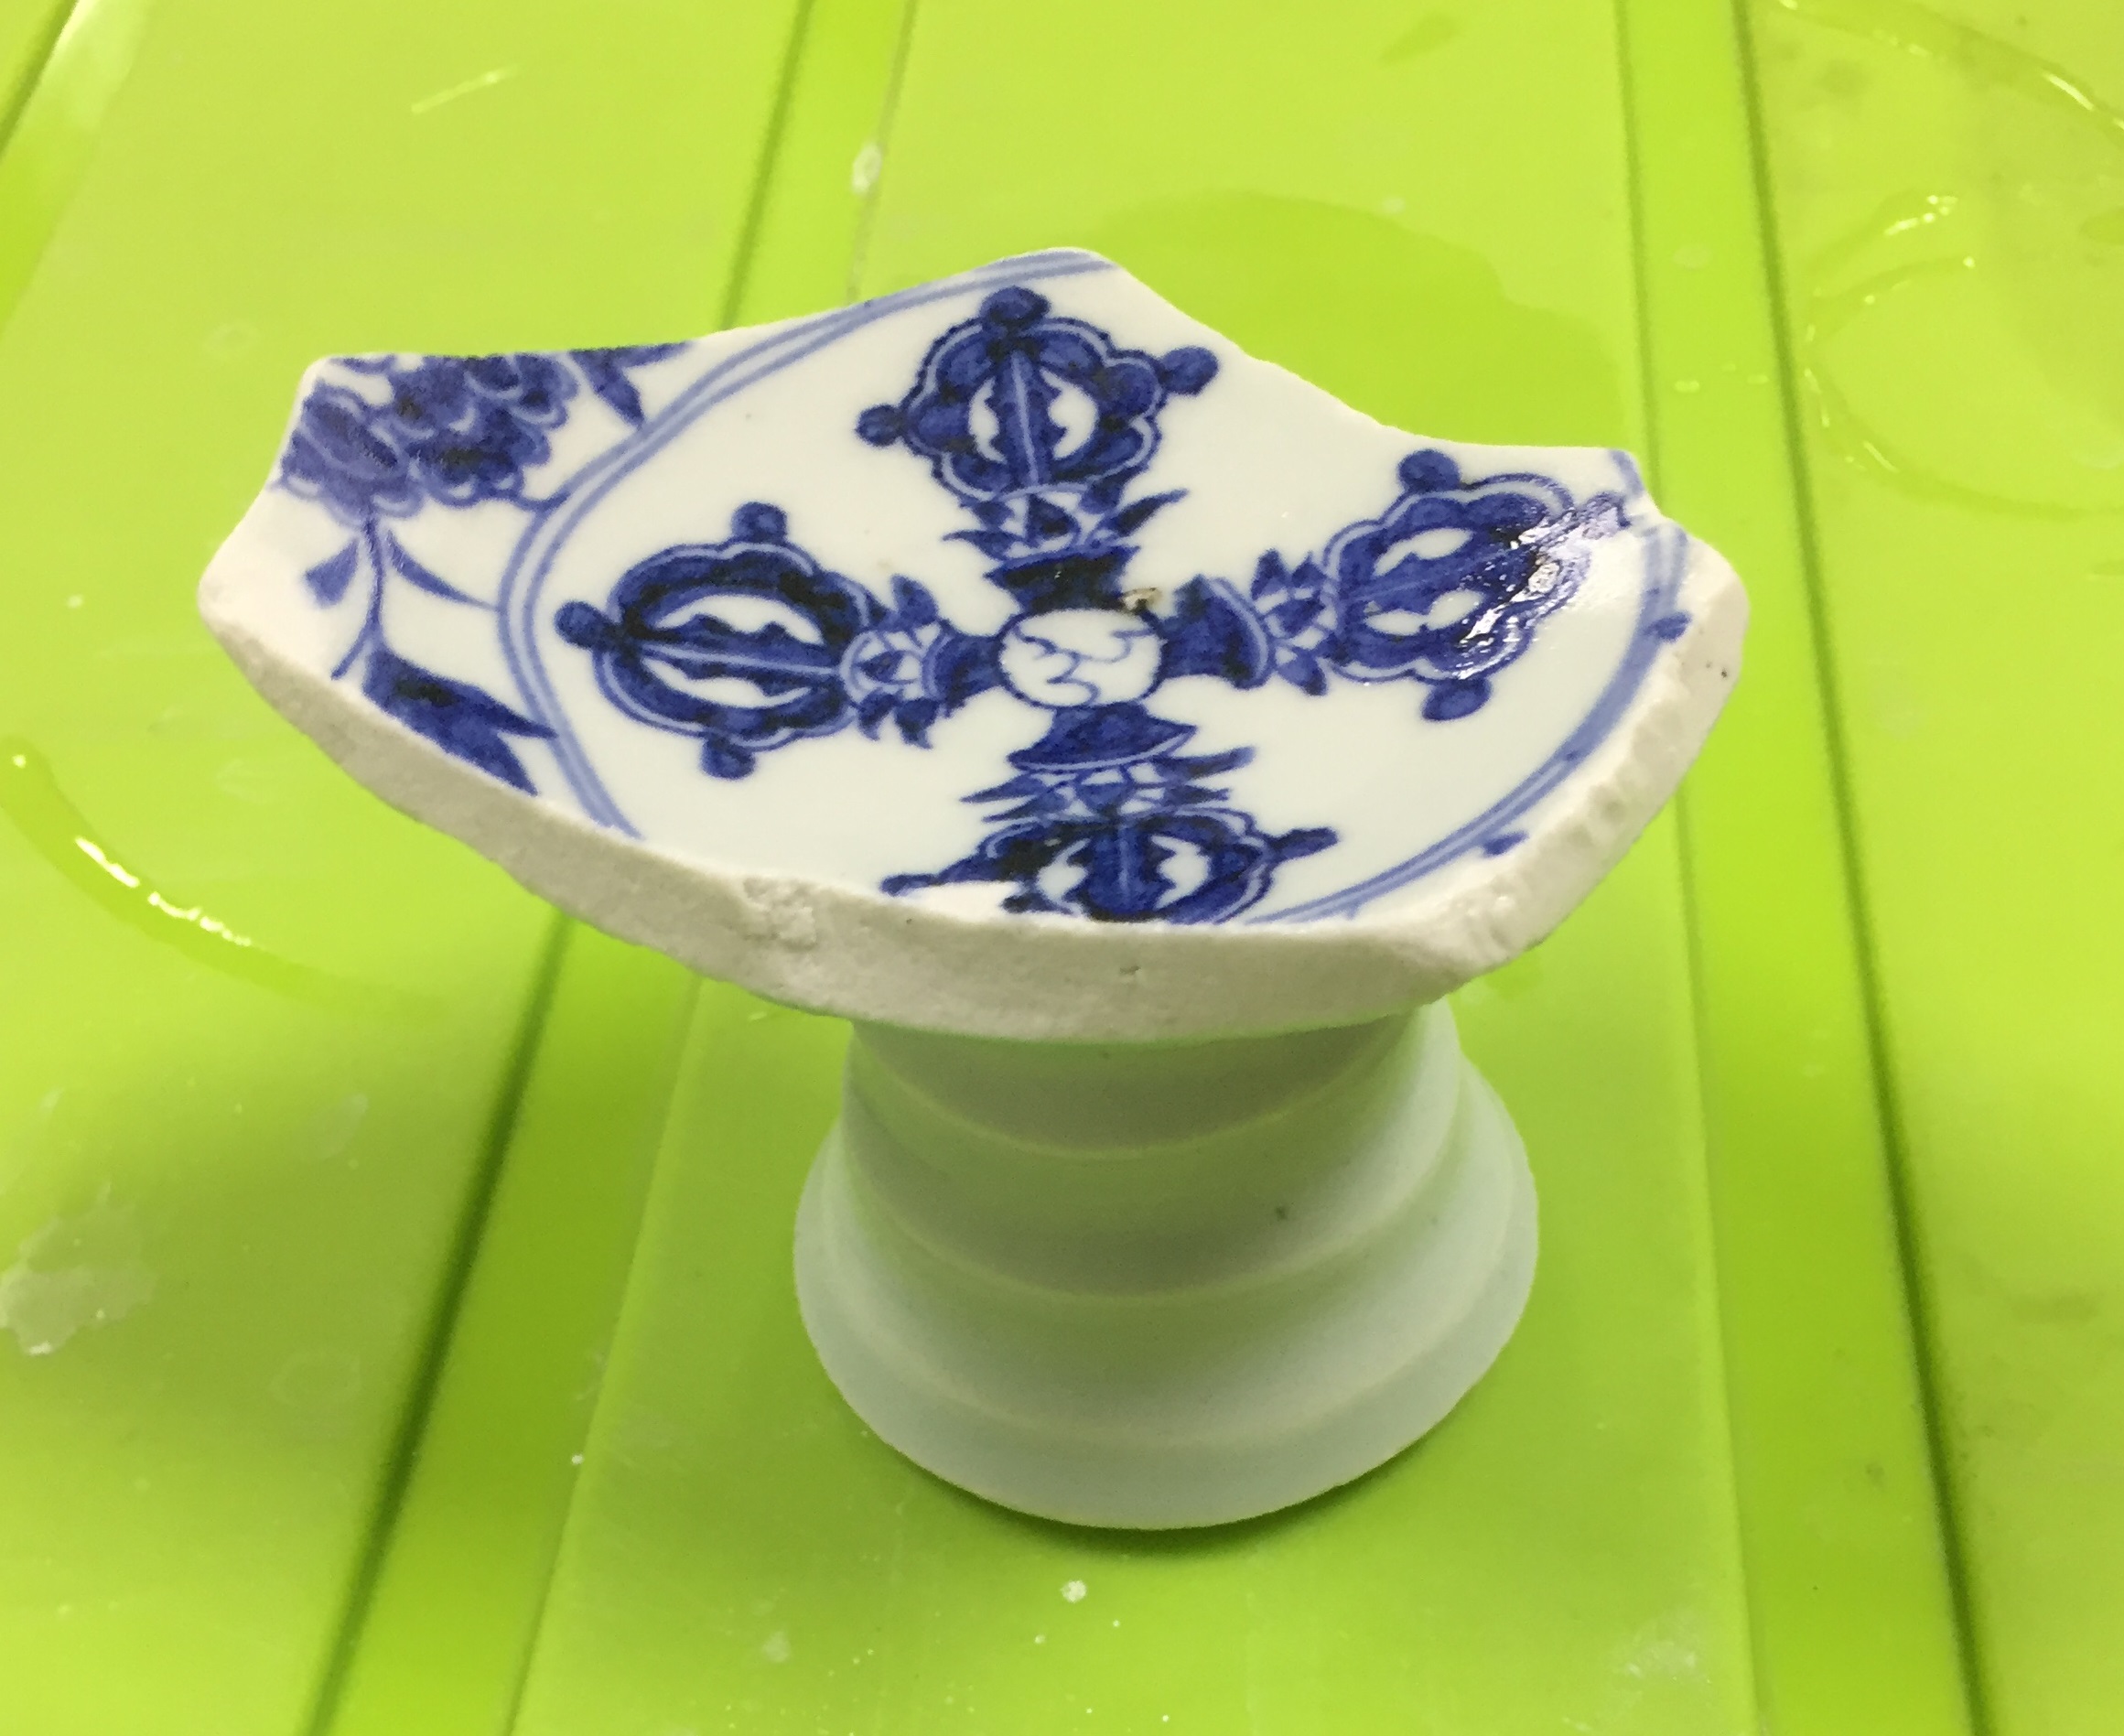 Blue-and-white stem-bowl shard with cross-vajra decoration from SW1